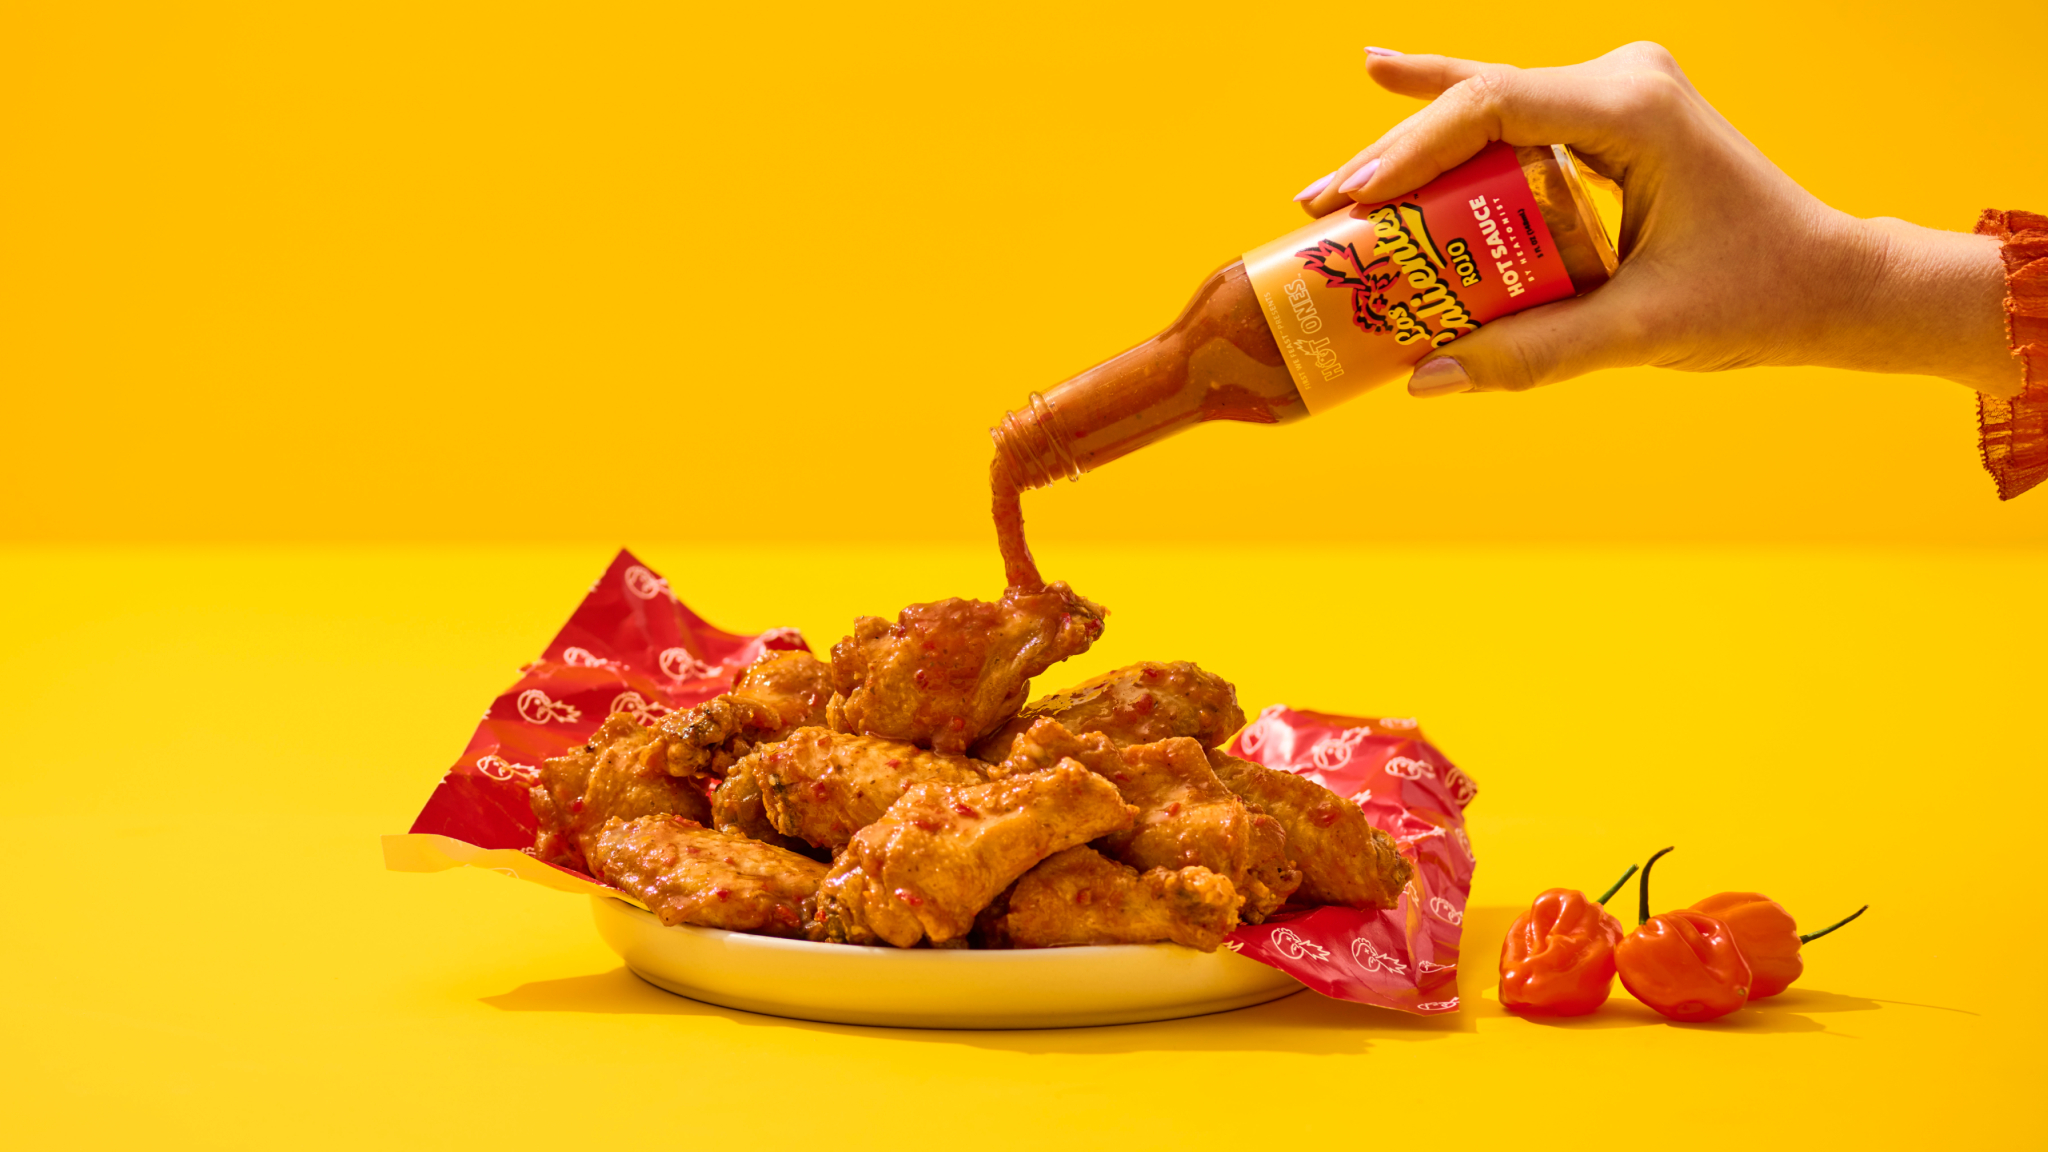 Hot Ones is bringing its iconic spicy wings to New York with a